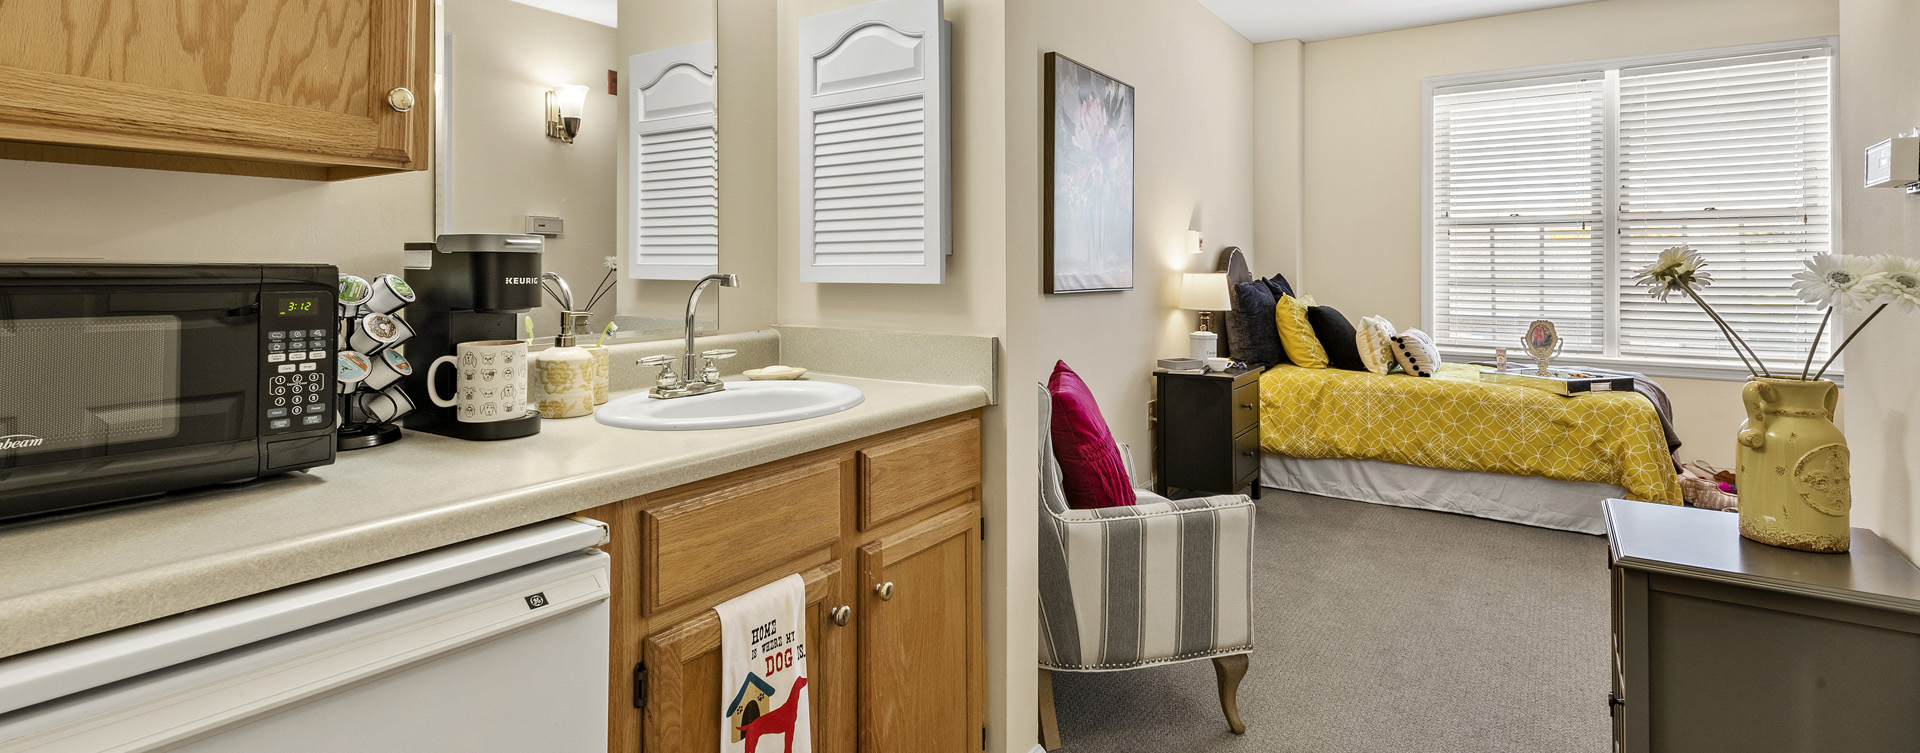 Enjoy senior friendly amenities, personal climate control and security in an apartment at Bickford of Worthington